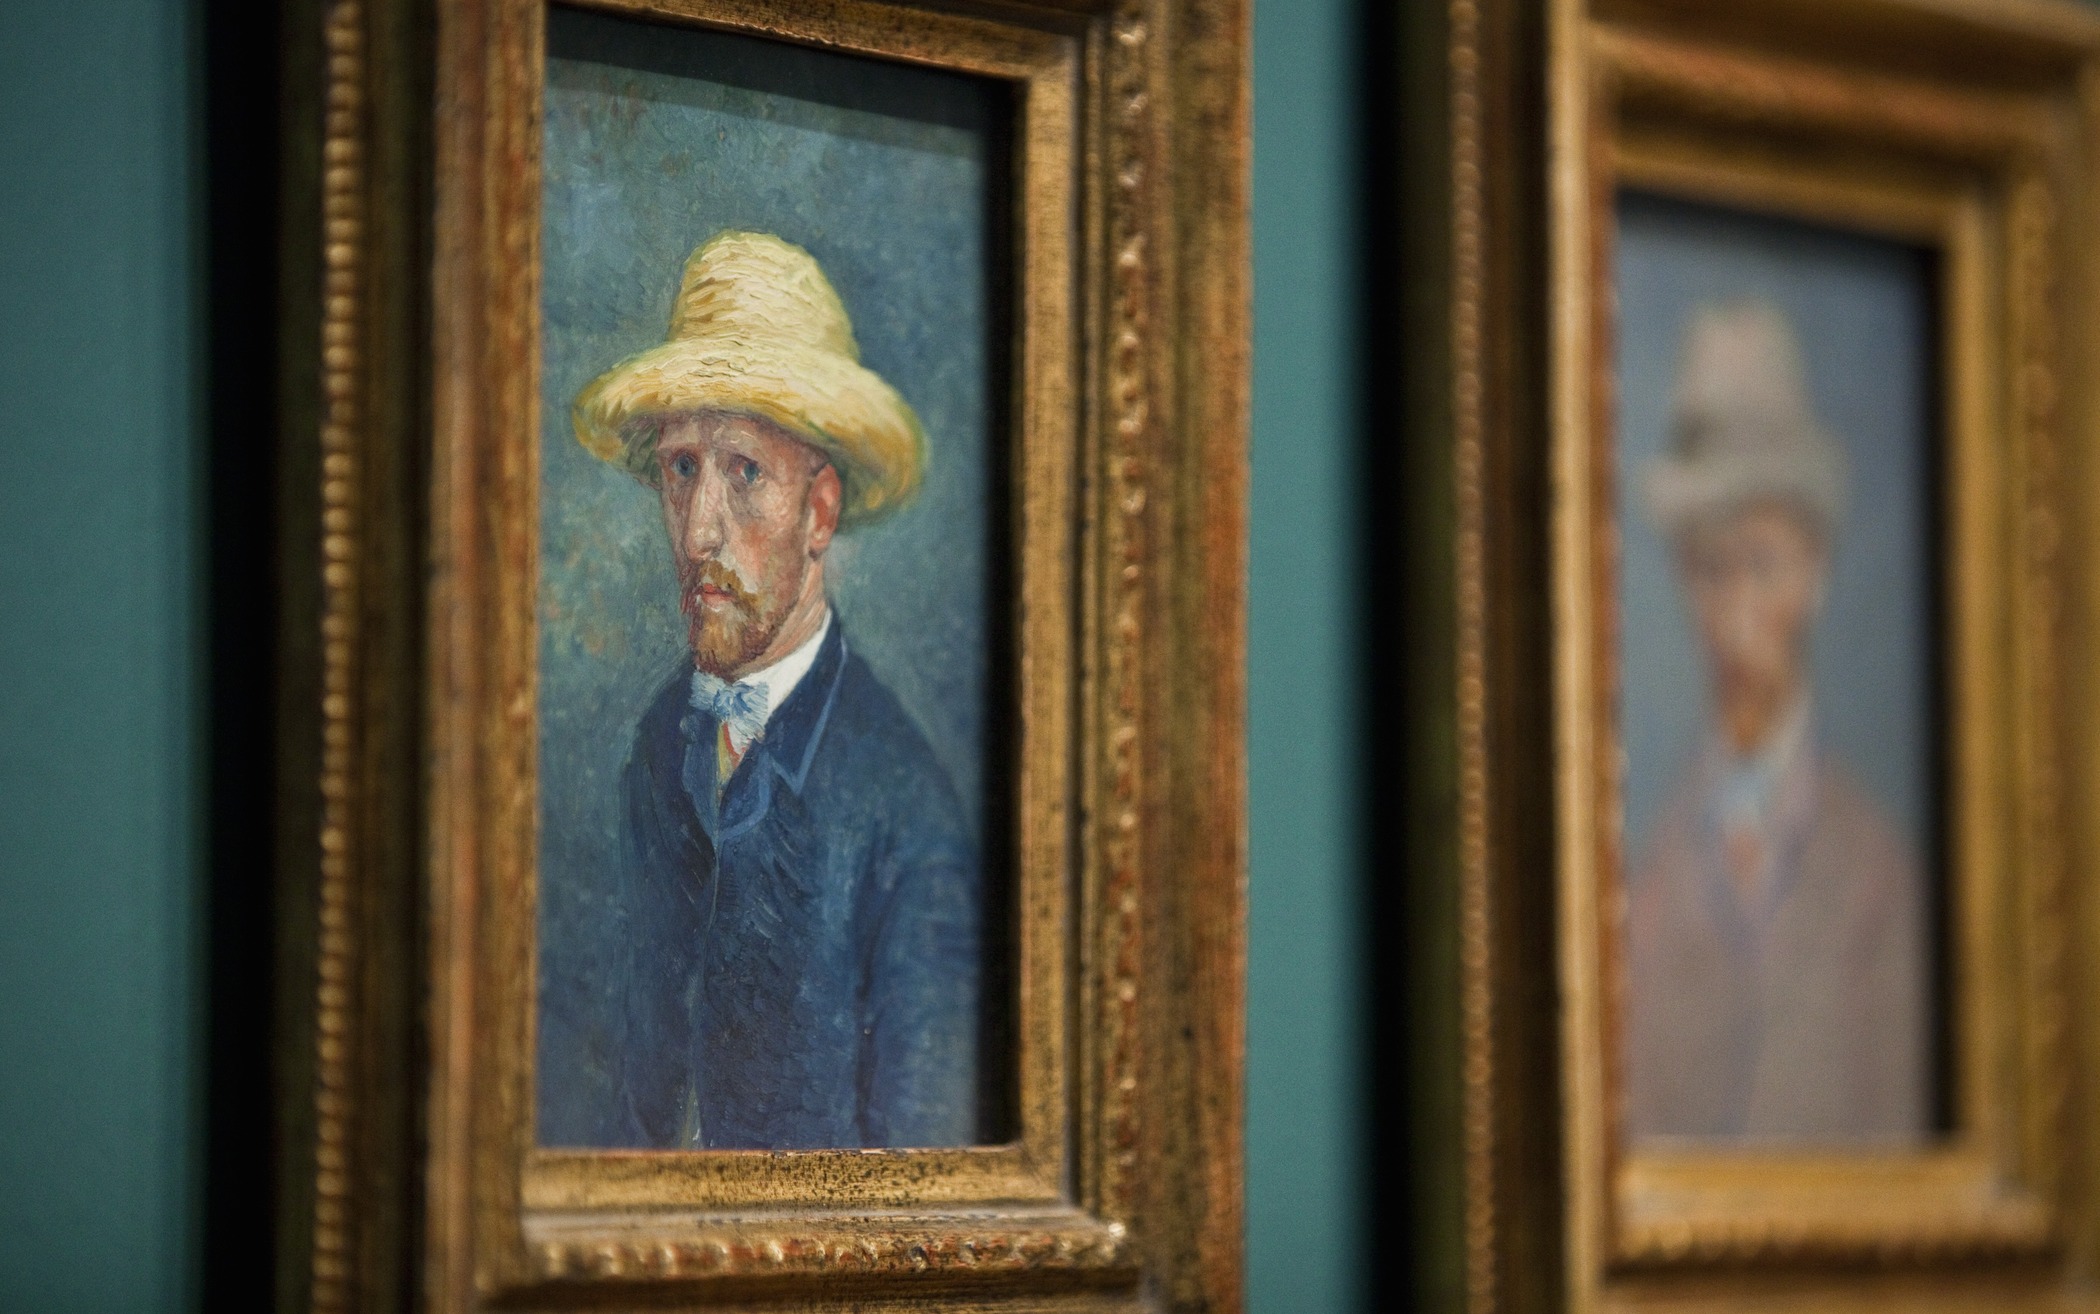 Paintings of dutch painter Vincent van Gogh are hung in the Van Gogh Museum in Amsterdam The Netherlands June 21th 2011.  The museum discovered a painting of Theo van Gogh, the brother of Vincent van Gogh. After new research the museum thinks that a selfportrait of Van Gogh from 1887 (L) is a portrait of his brother. The new exhibition Van Gogh in Antwerpen and Paris in the Van Gogh museum opens for the public on June 22. AFP PHOTO / ANP / ILVY NJIOKIKTJIEN ***netherlands out - belgium out*** (Photo credit should read Ilvy Njiokiktjien/AFP/Getty Images)